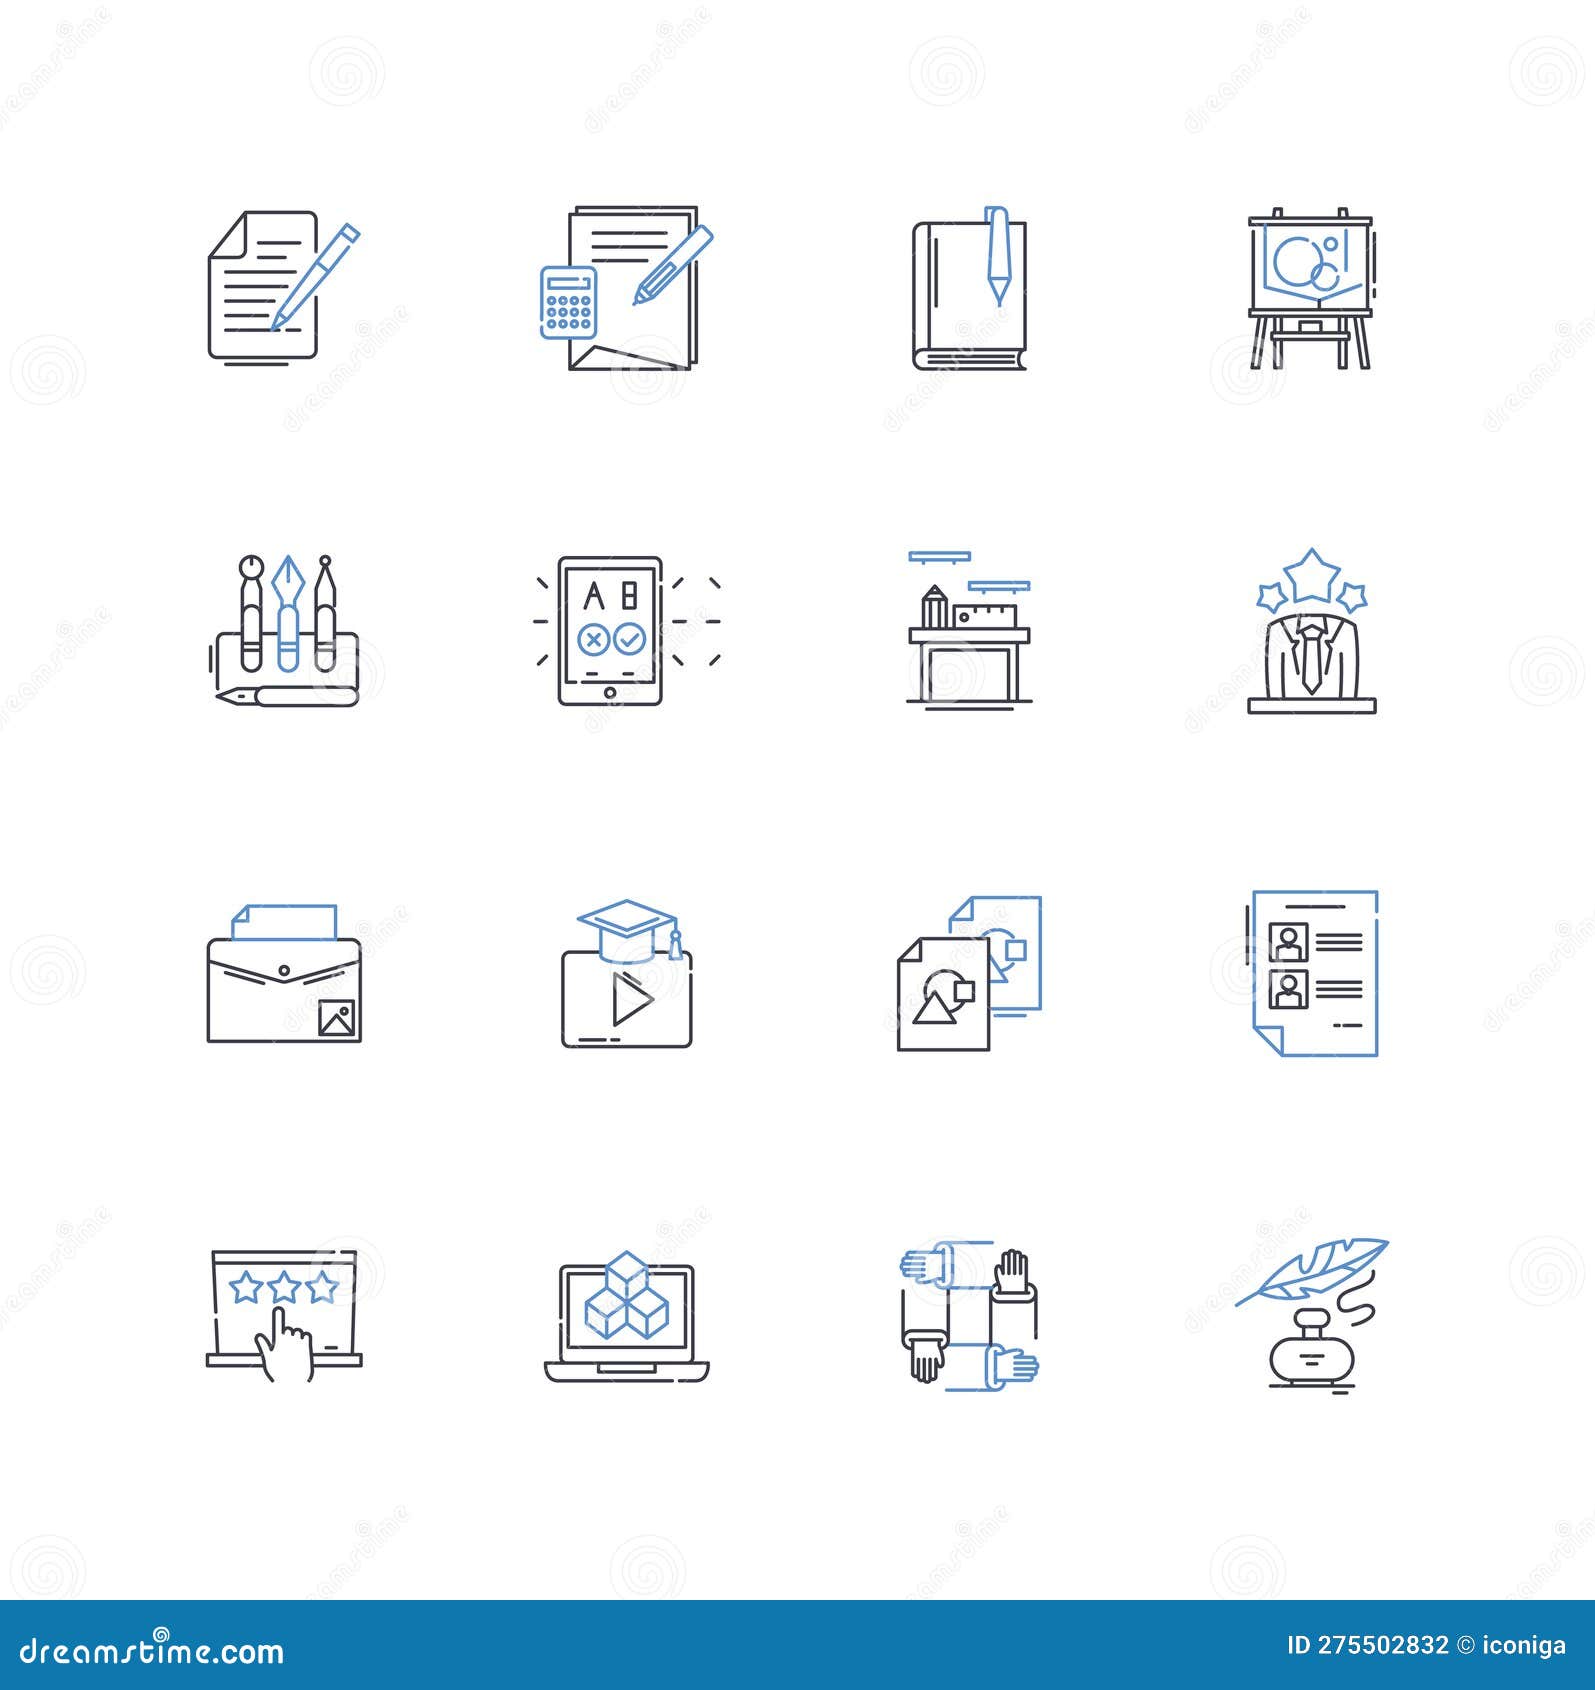 functional ideology line icons collection. efficiency, rationality, pragmatism, utilitarianism, objectivity, structure